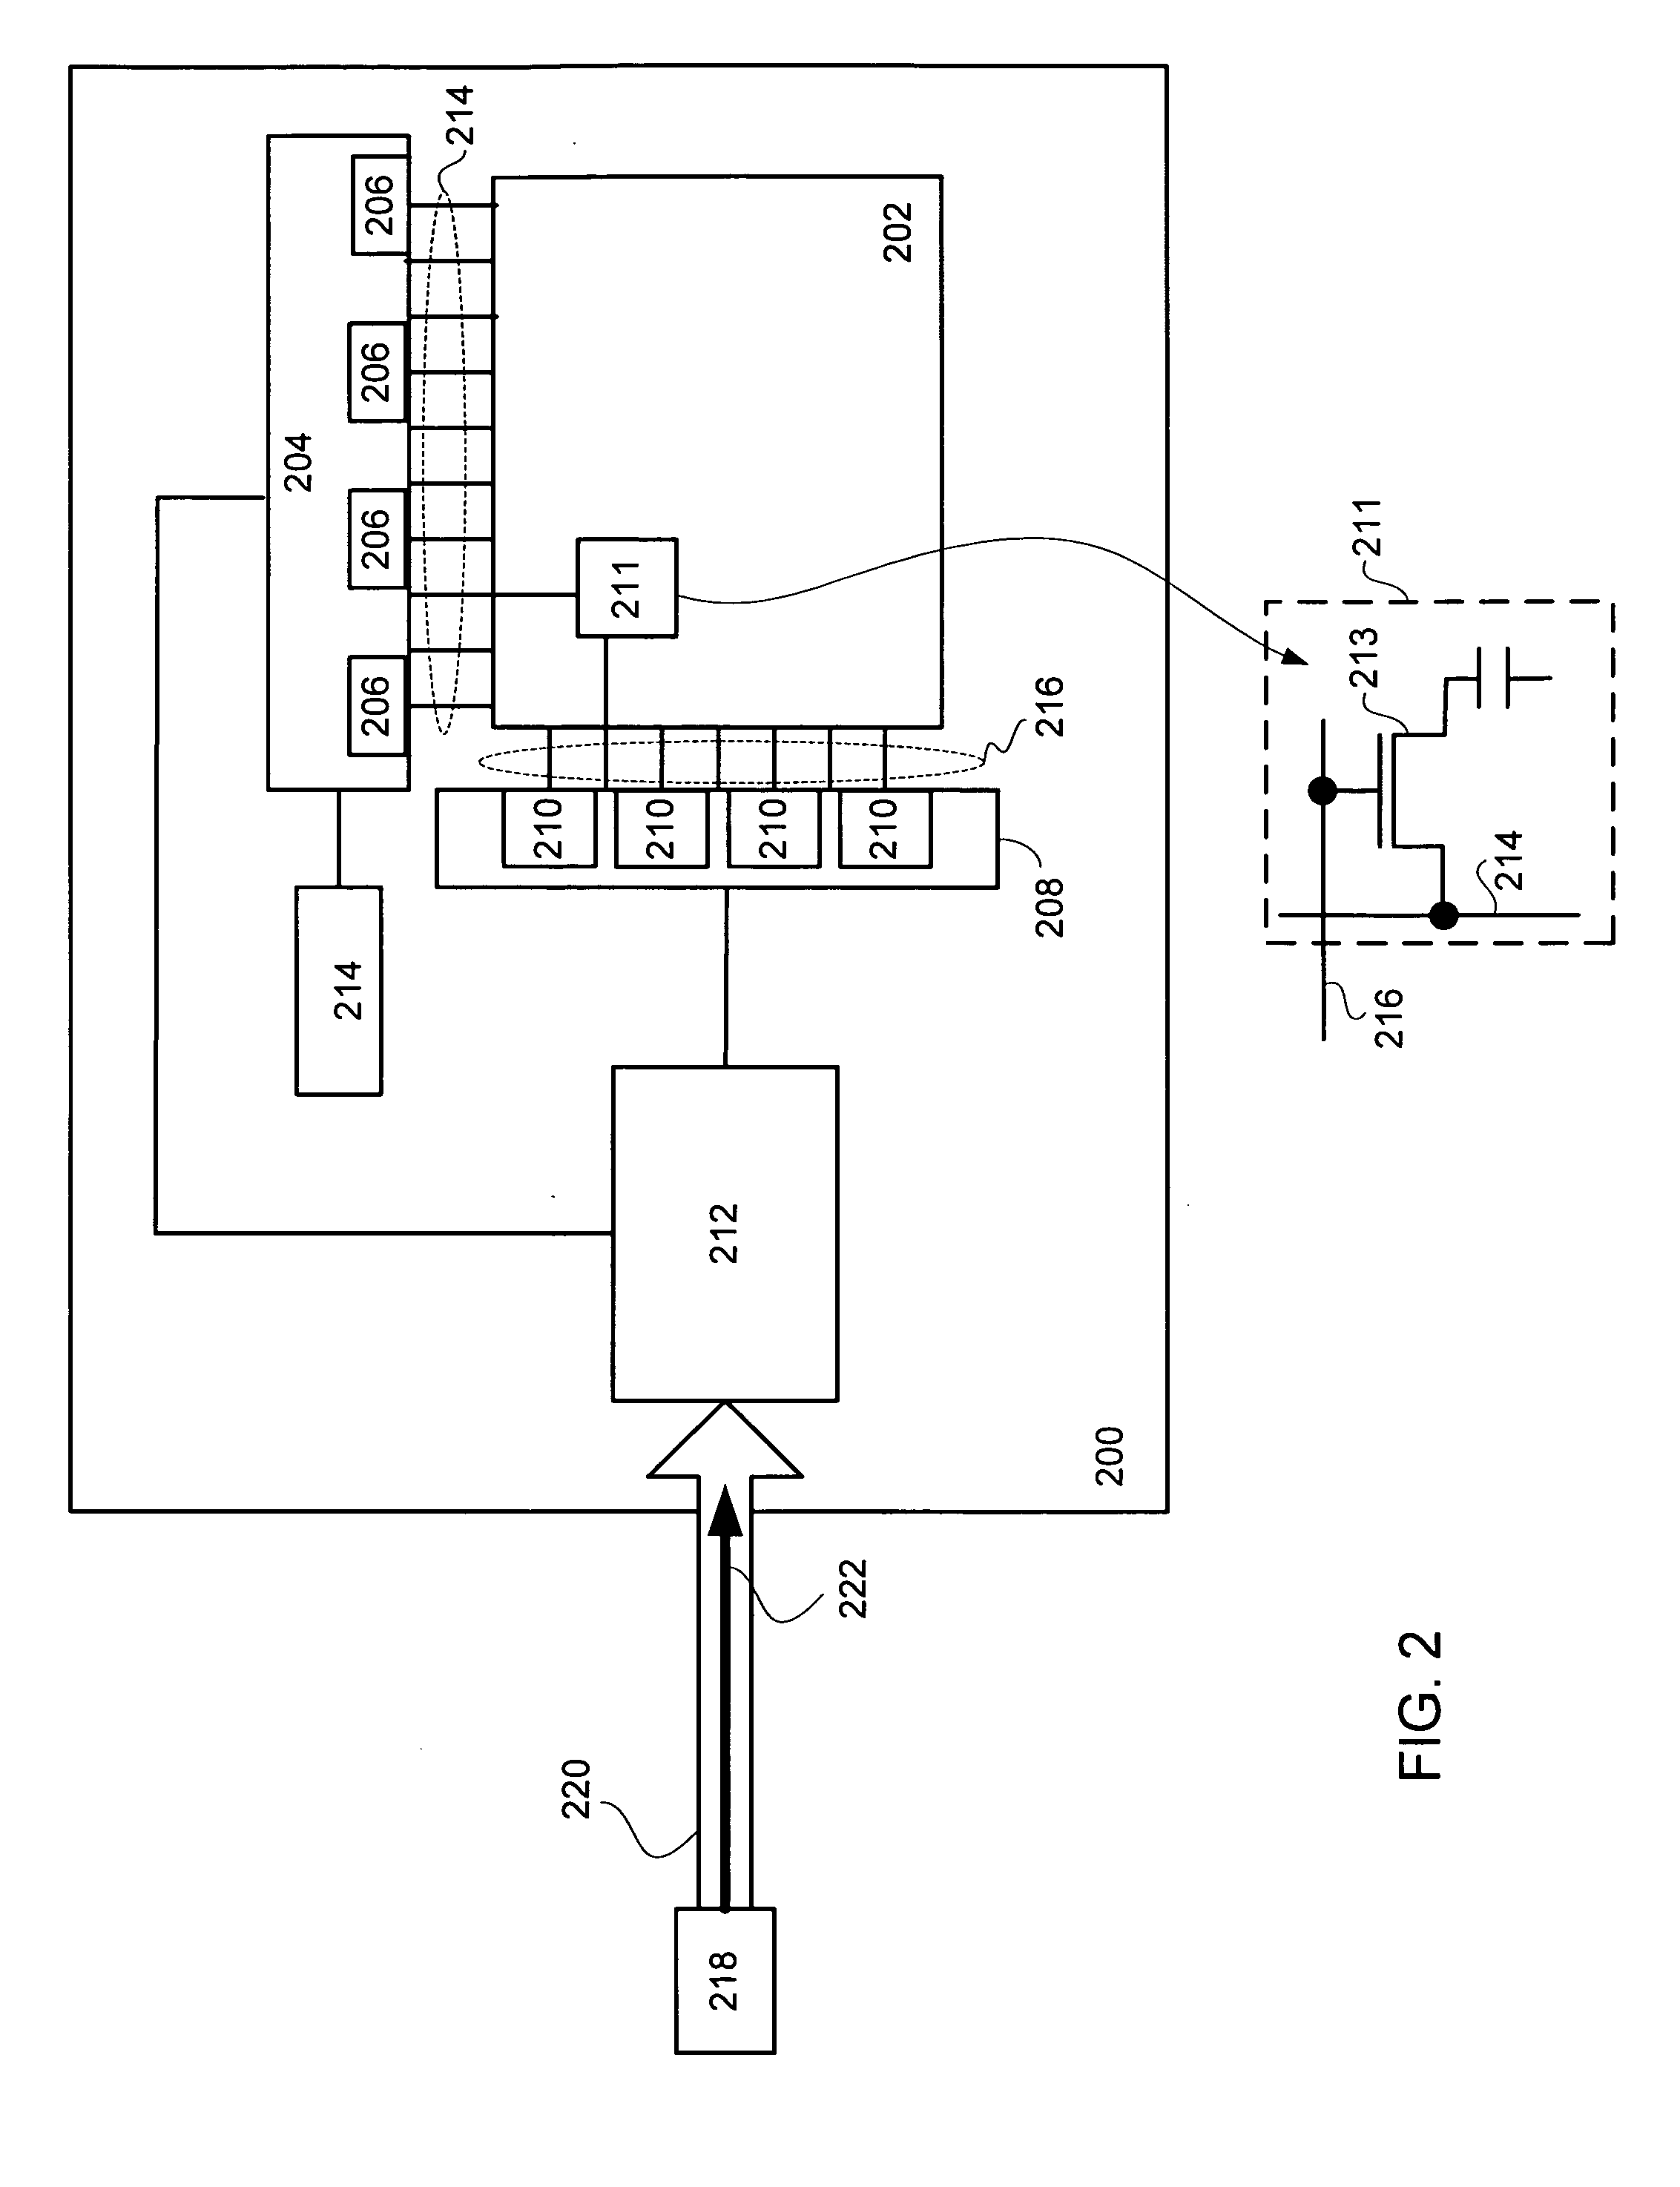 LCD overdrive with data compression for reducing memory bandwidth